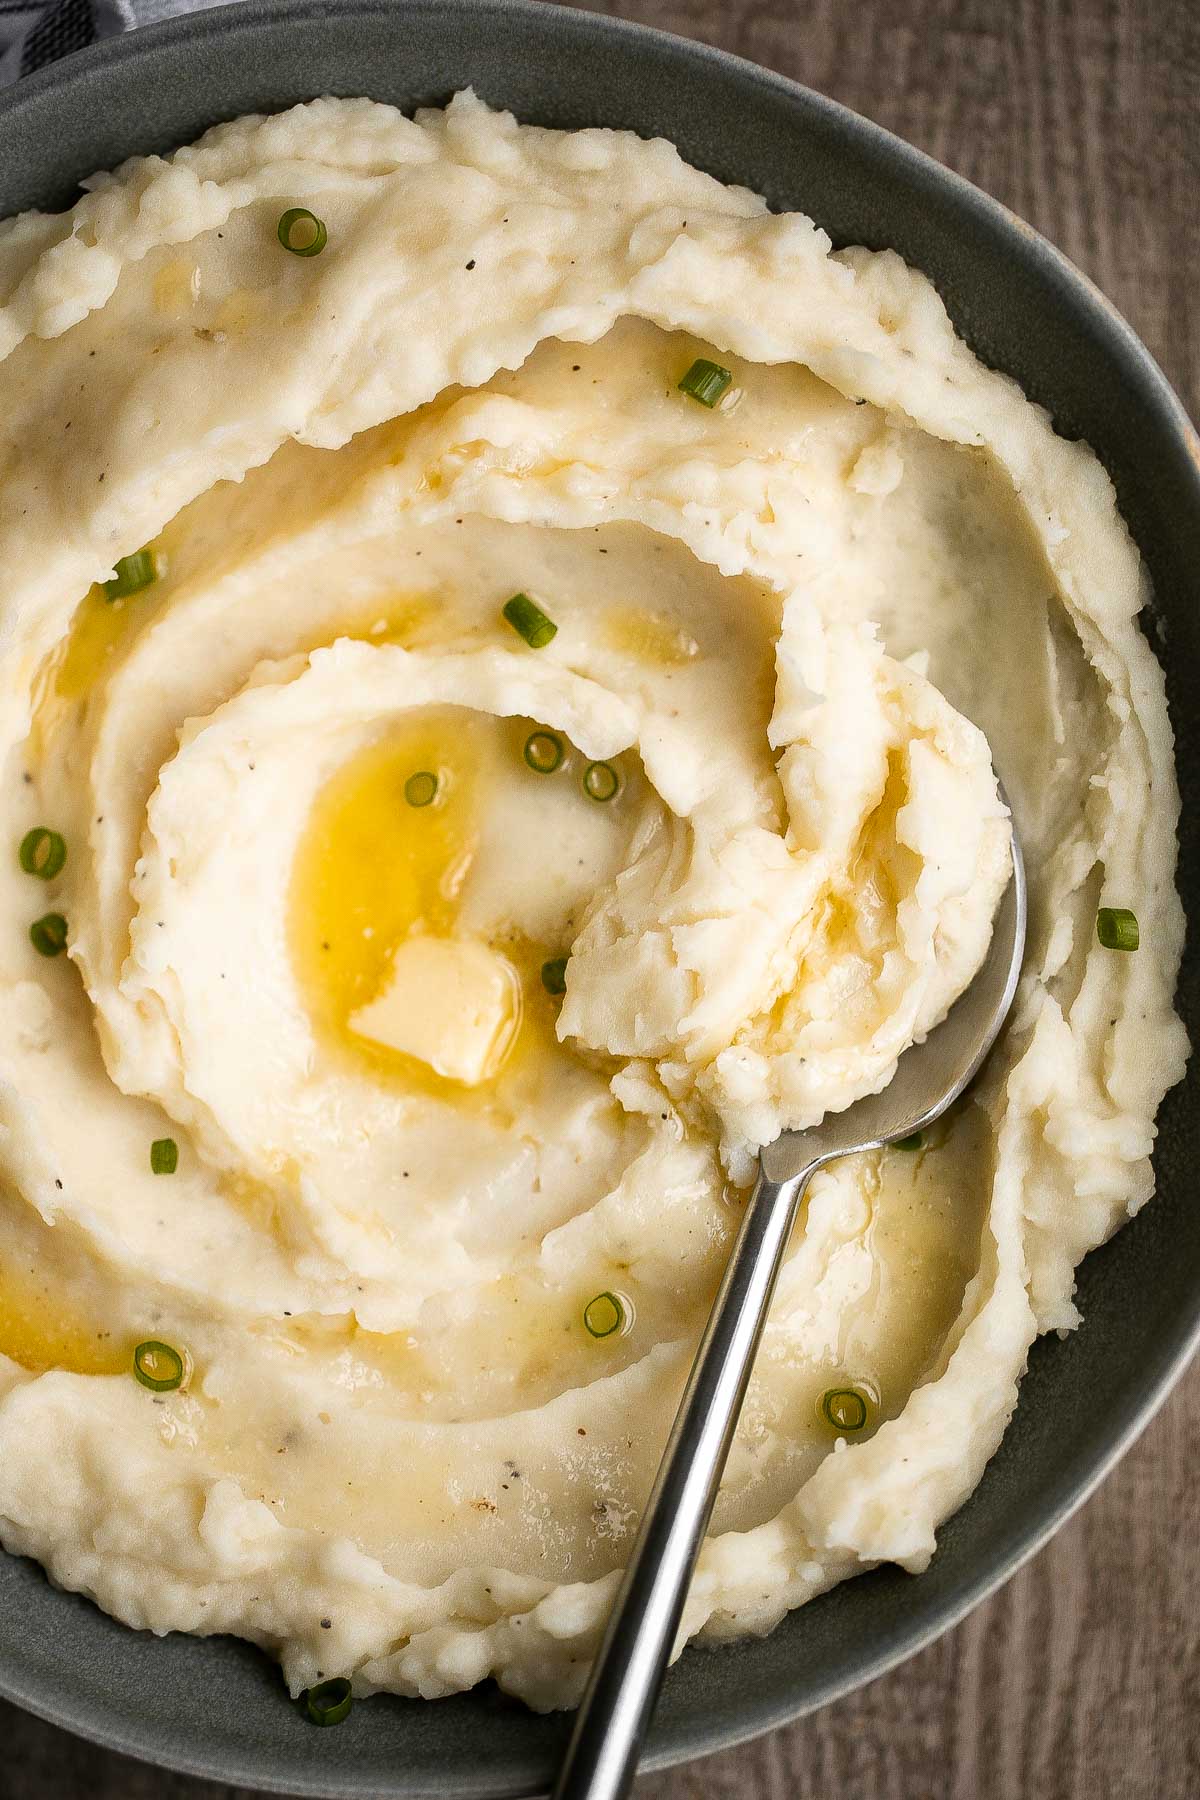 Instant pot mashed potatoes are the quickest and easiest mashed potatoes you’ll make in under 20 minutes (including prep!) in the pressure cooker. | aheadofthyme.com